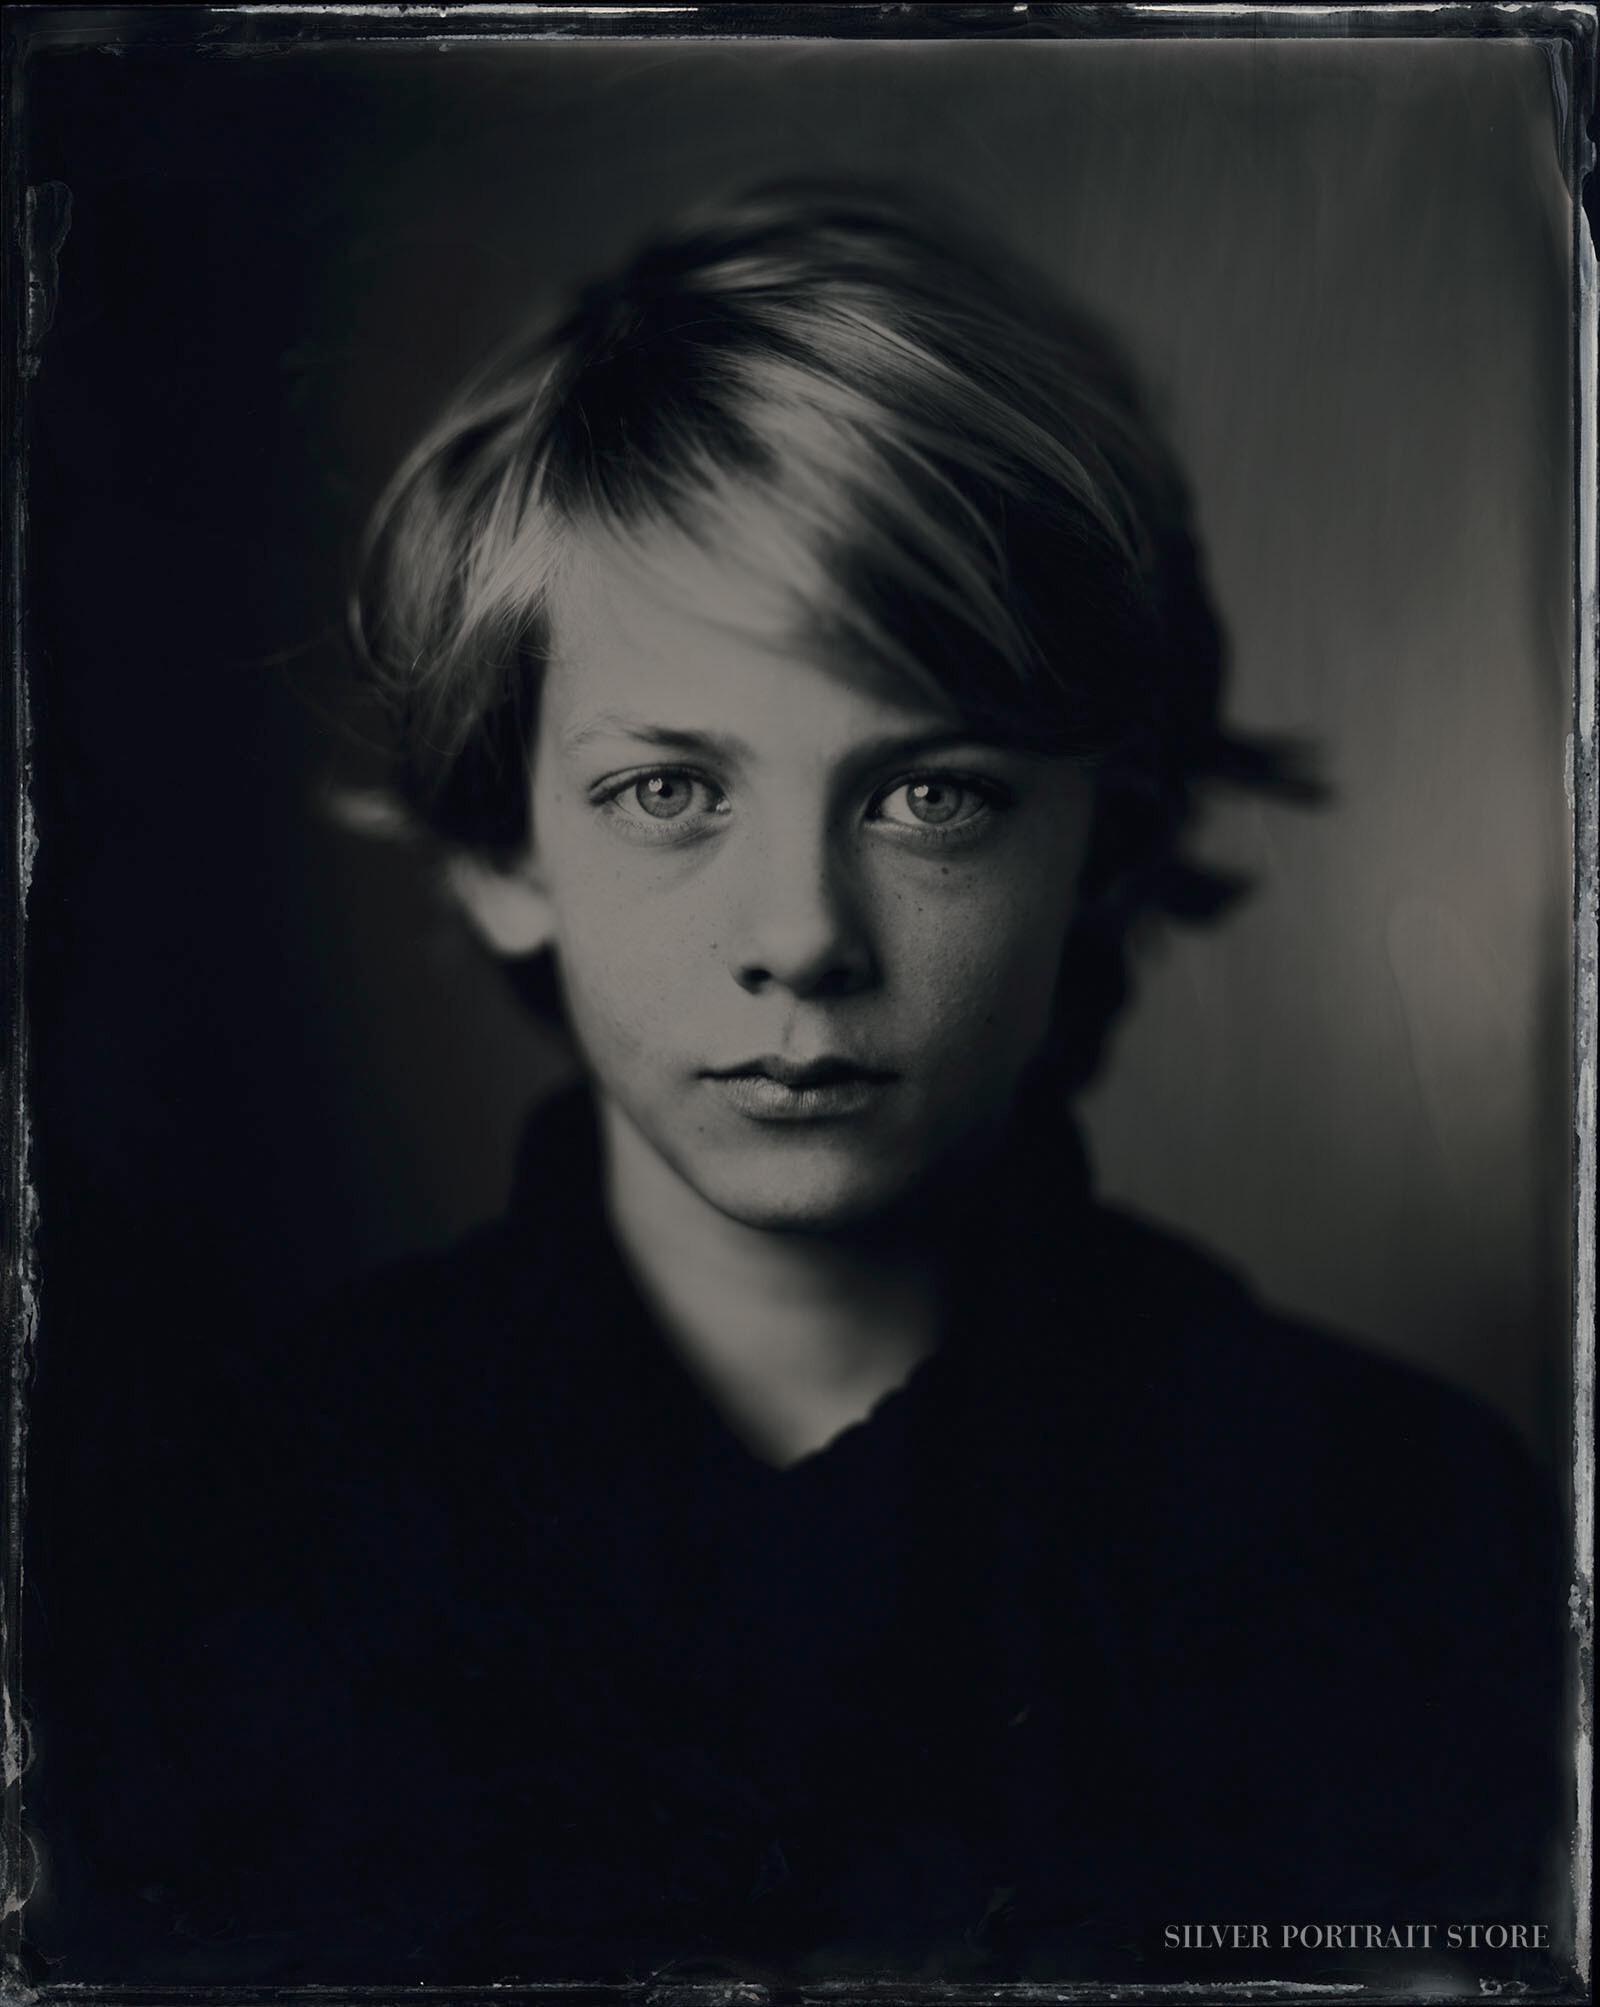 Pepijn-Silver Portrait Store-Scan from Wet plate collodion-Tintype 20 x 25 cm.